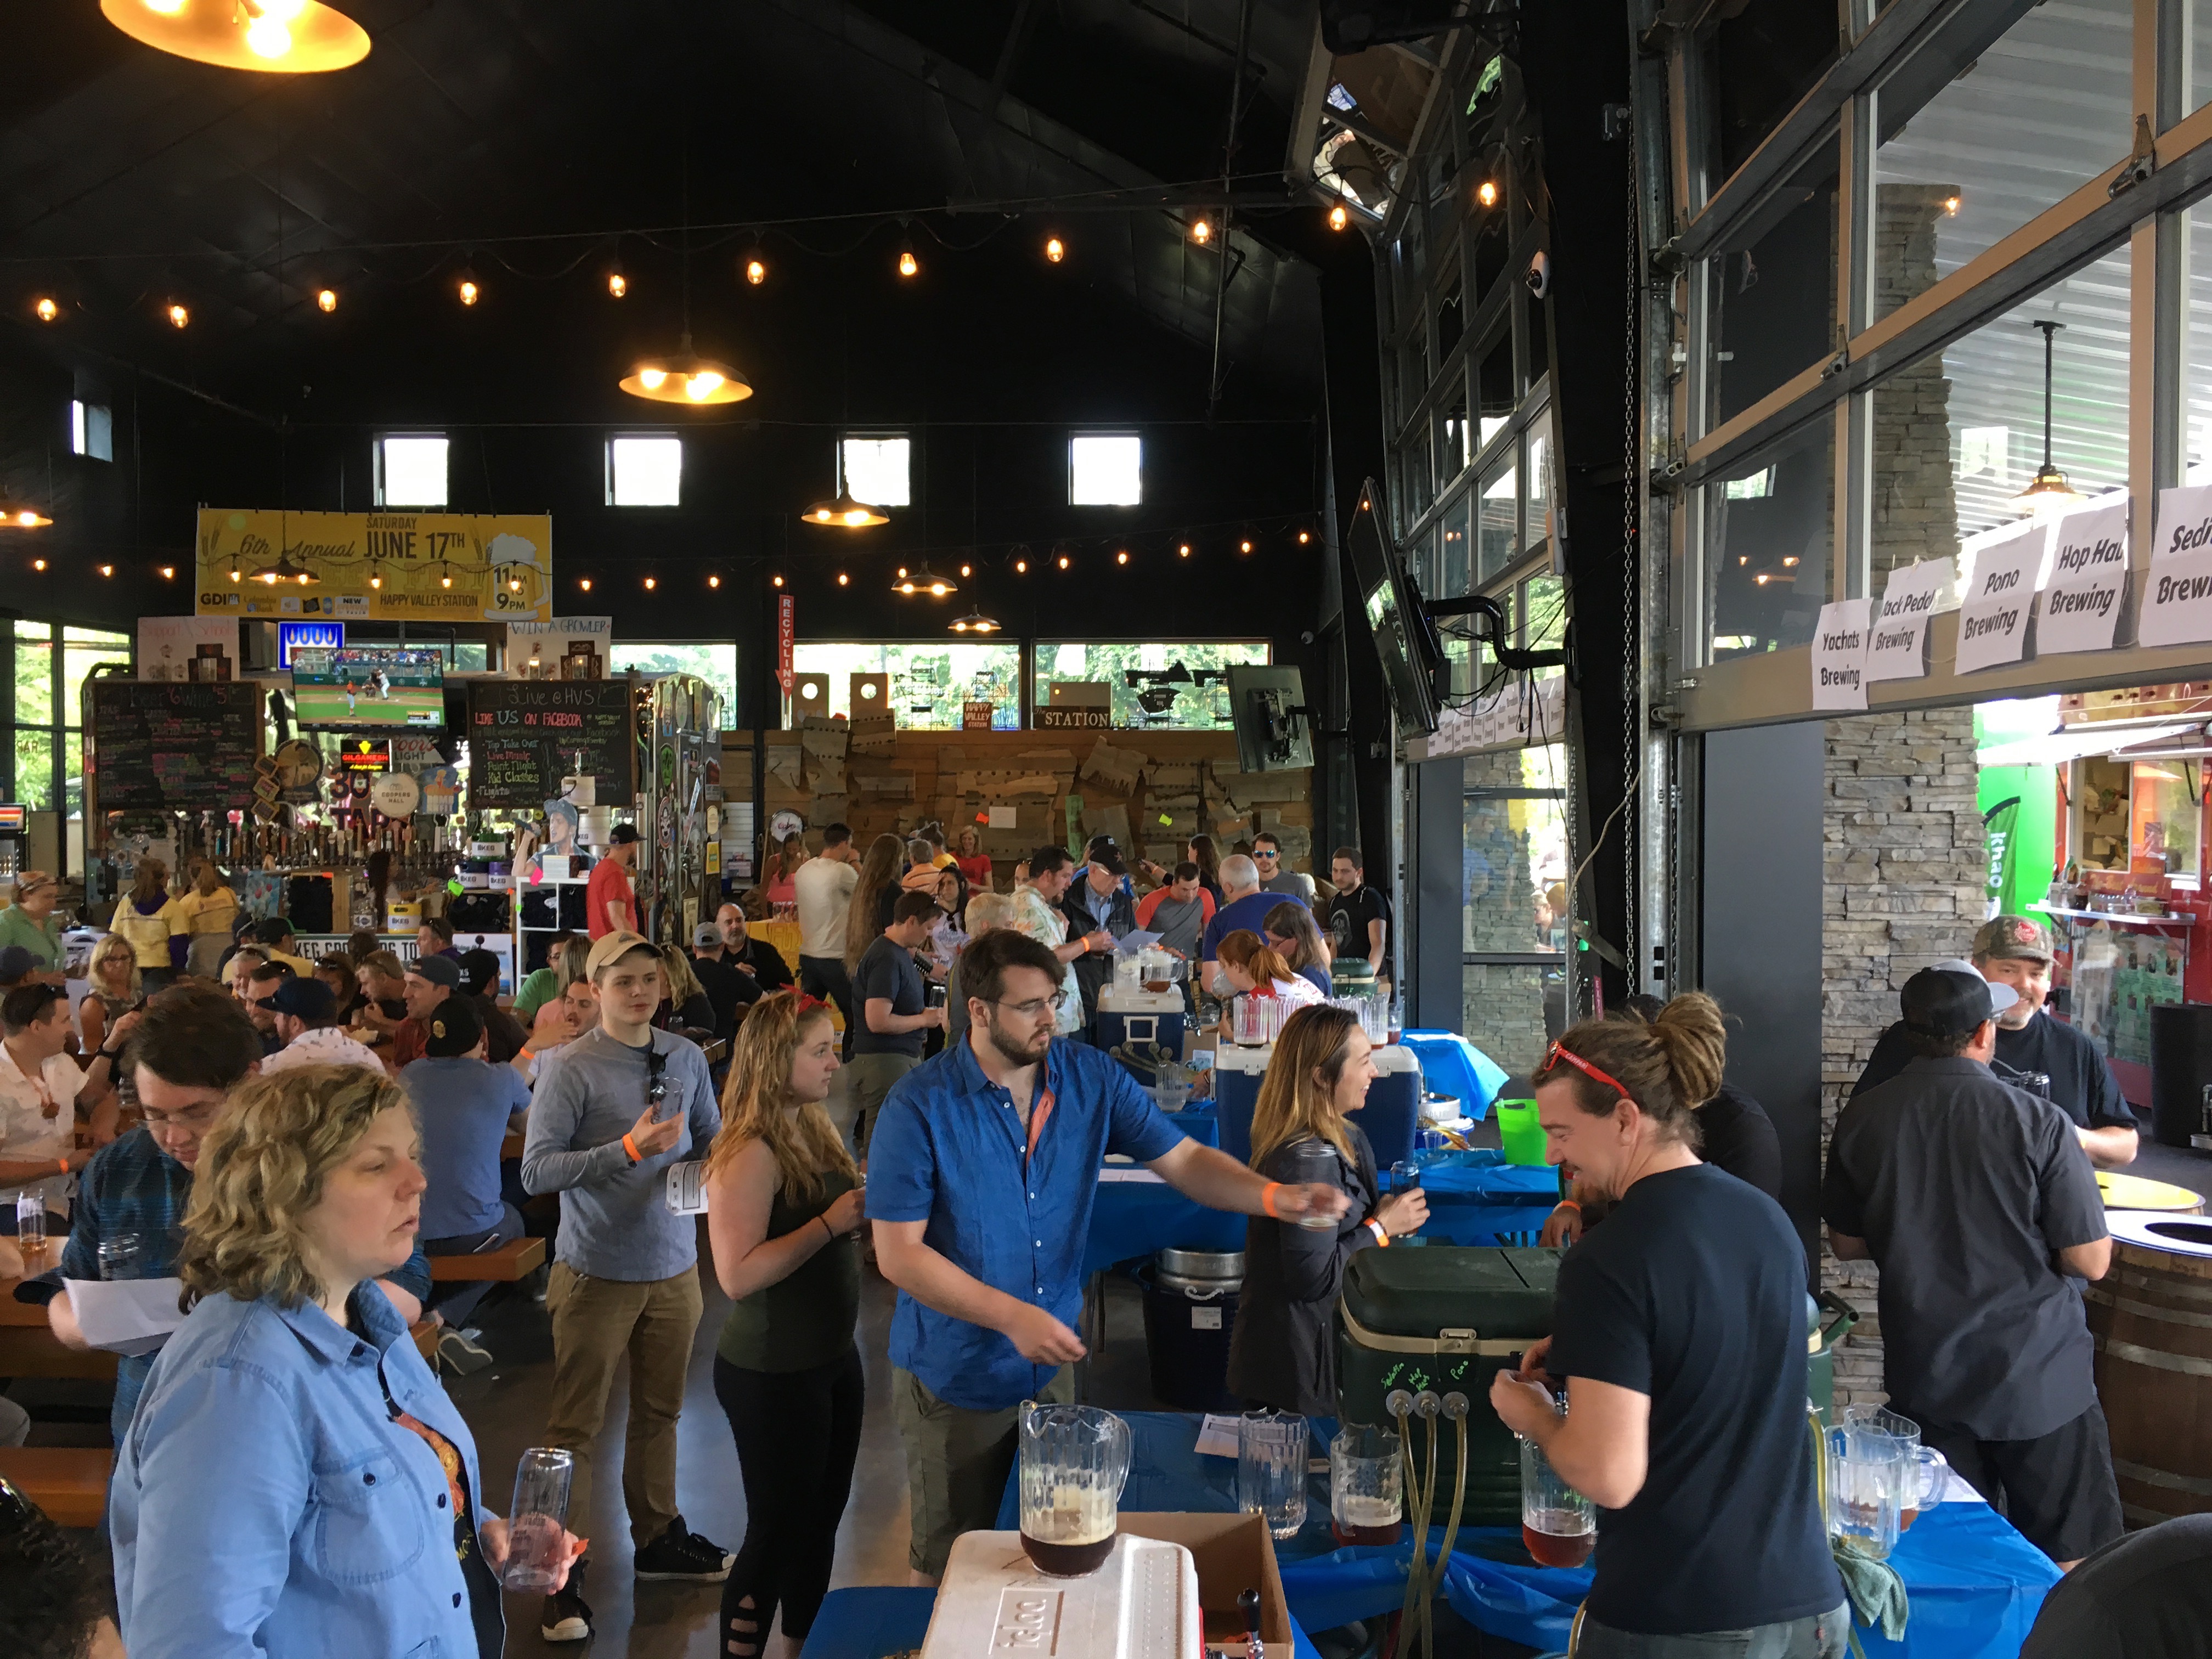 A festive crowd at Rye Beer Fest that was held at Happy Valley Station.